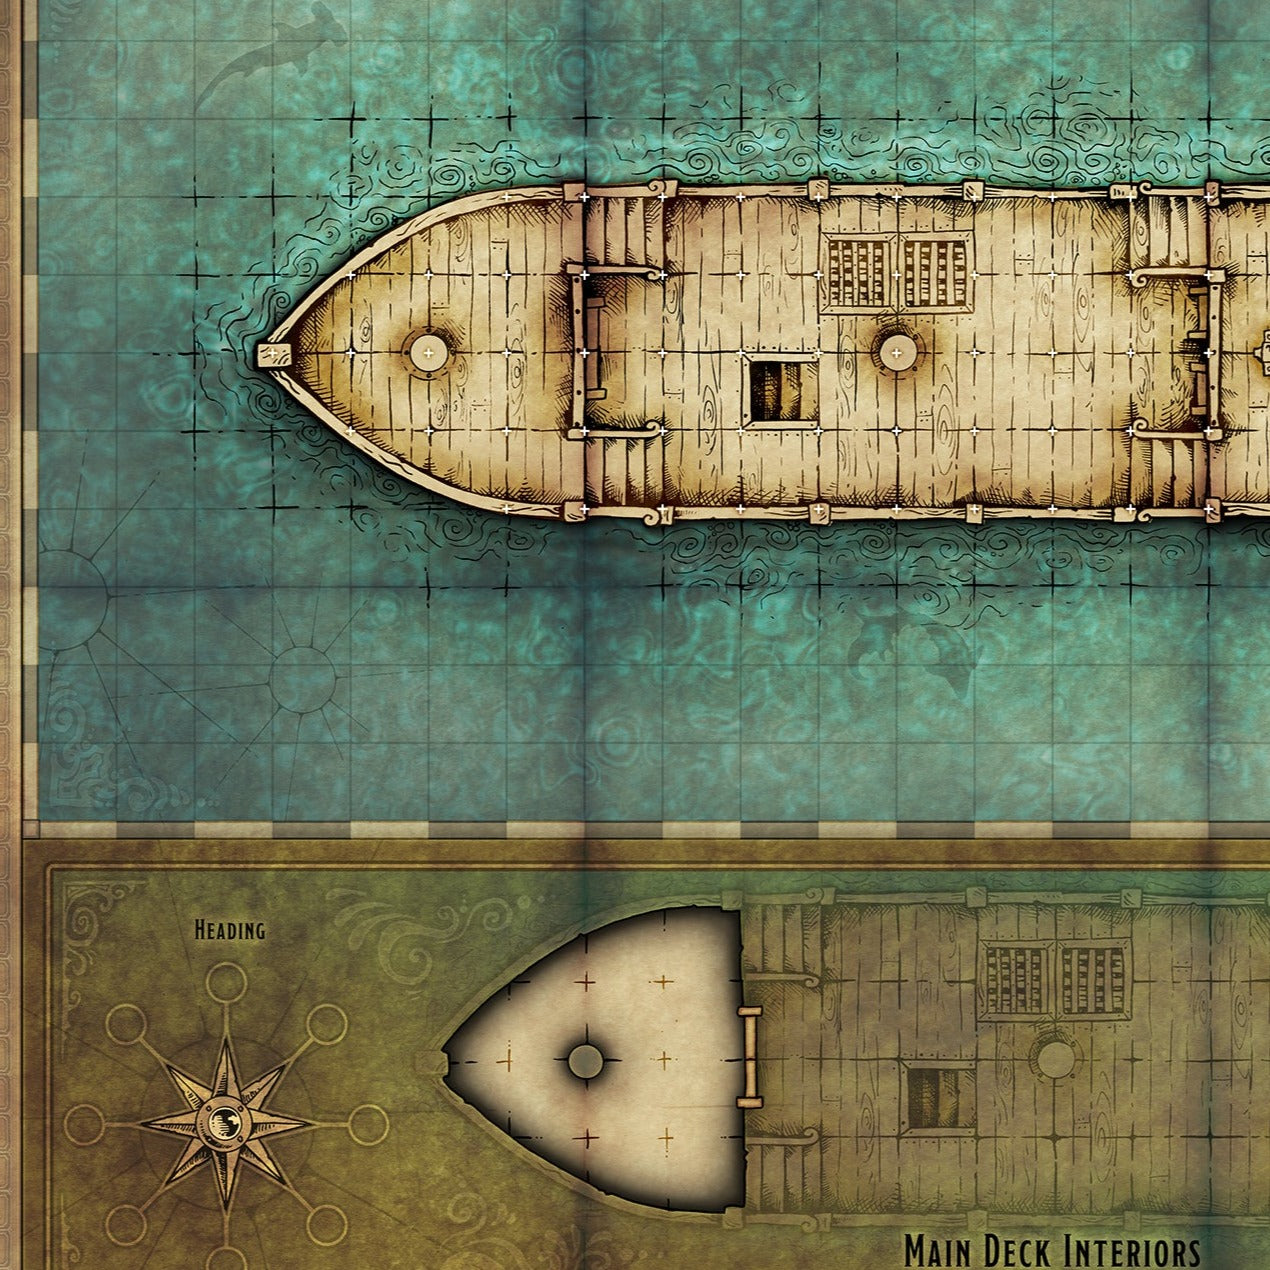 Sinister Silver Ship Maps